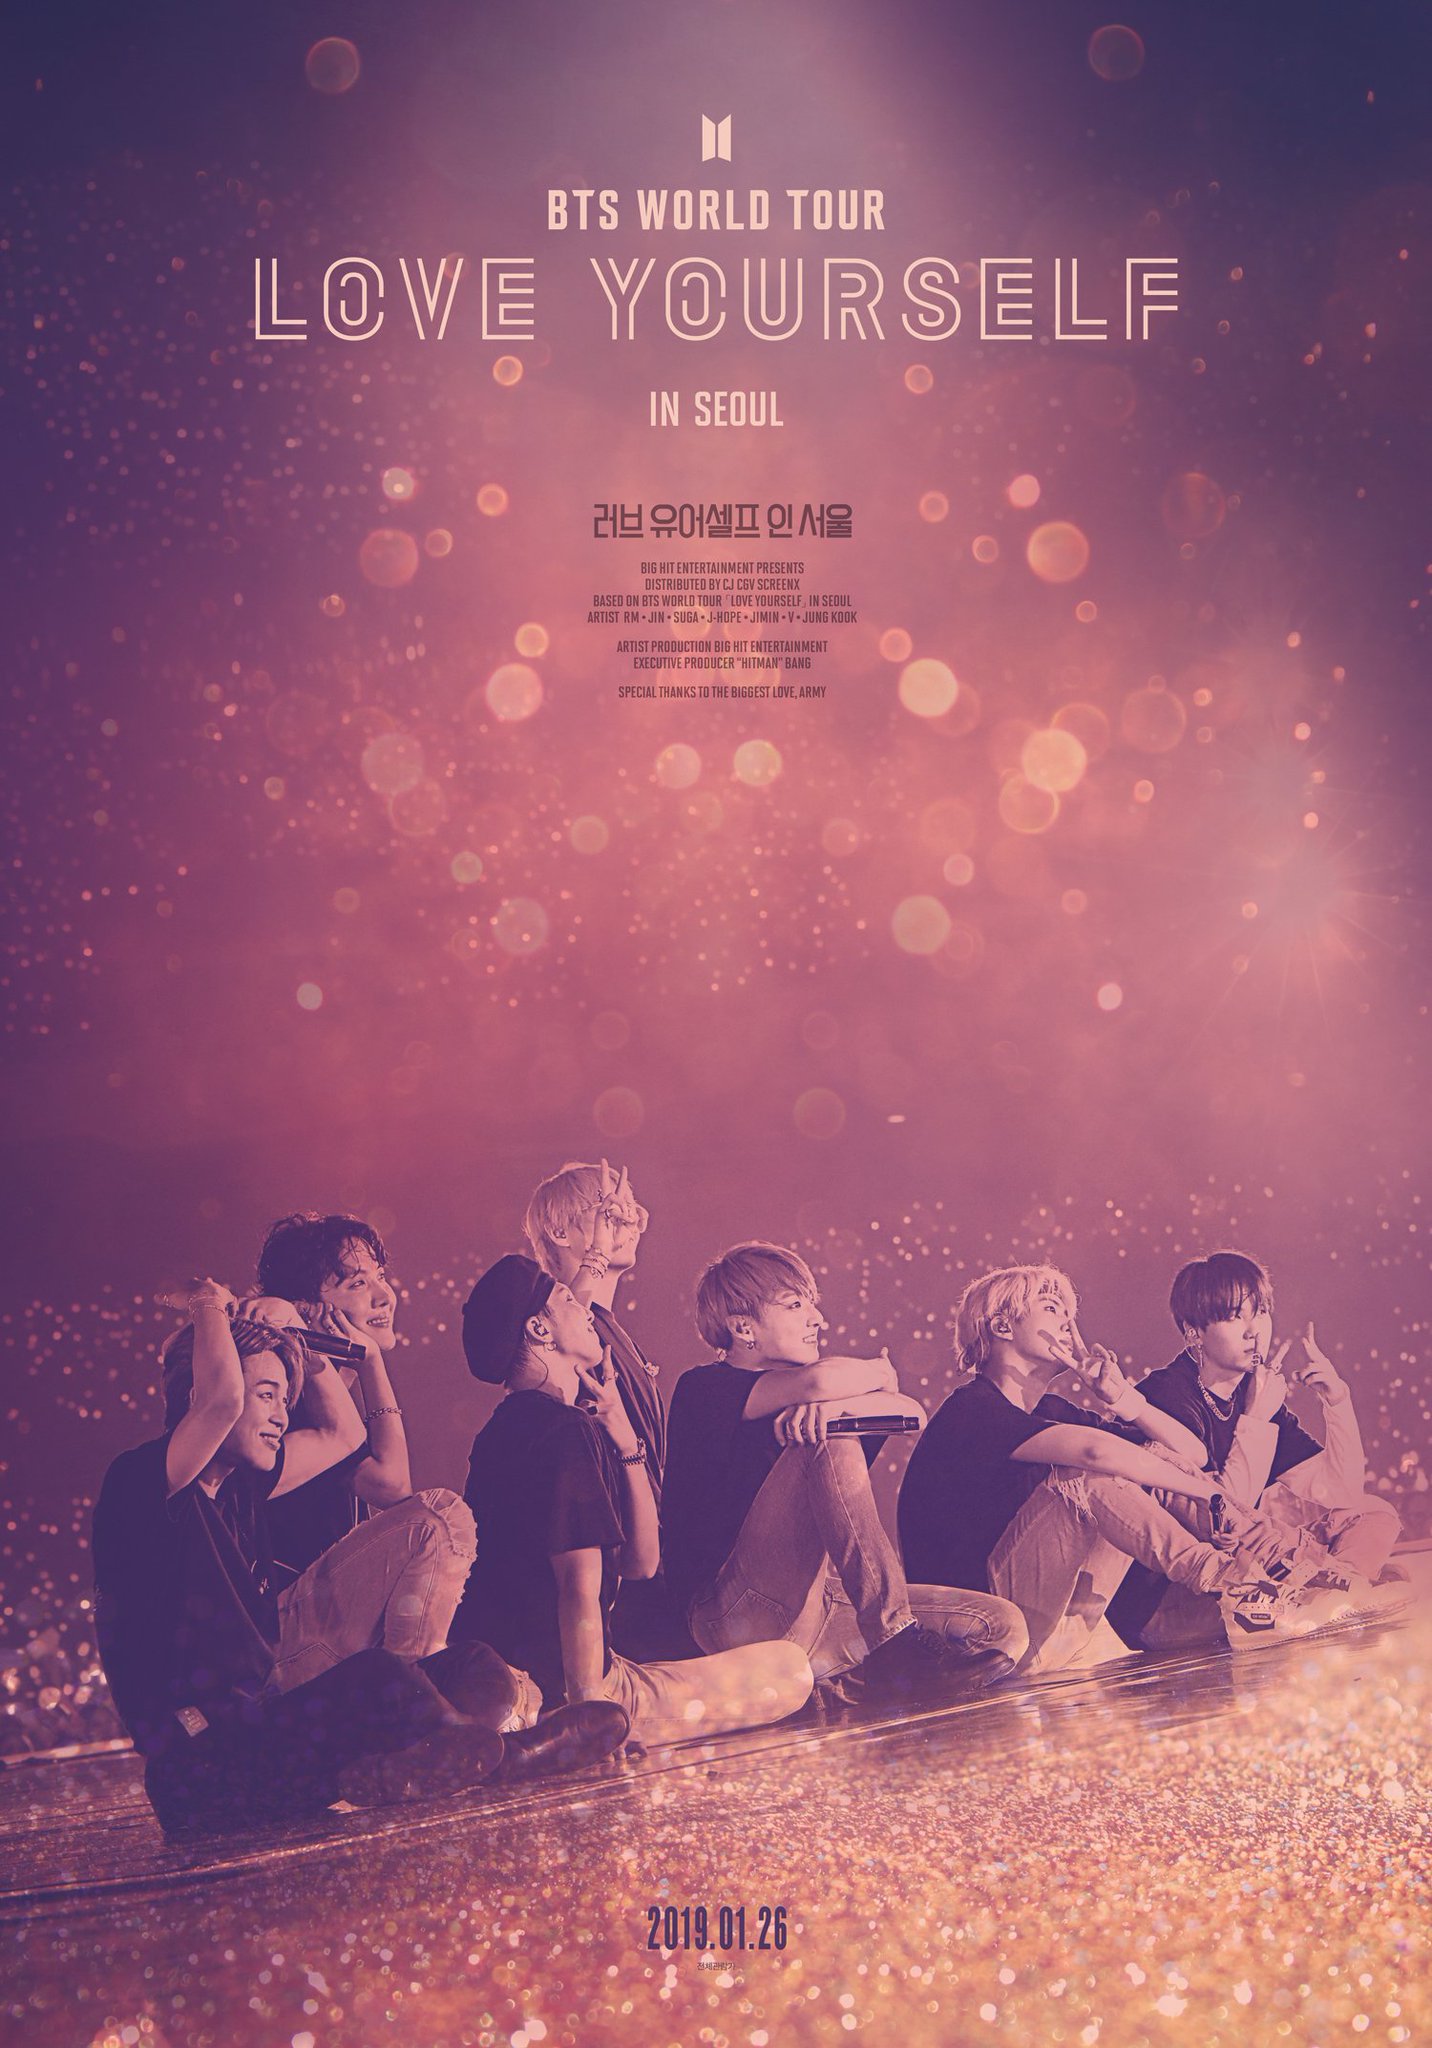 Bts Love Yourself Tour Commentary Free download BTS images Love Yourself Seoul Poster HD wallpaper and background [1432x2048] for